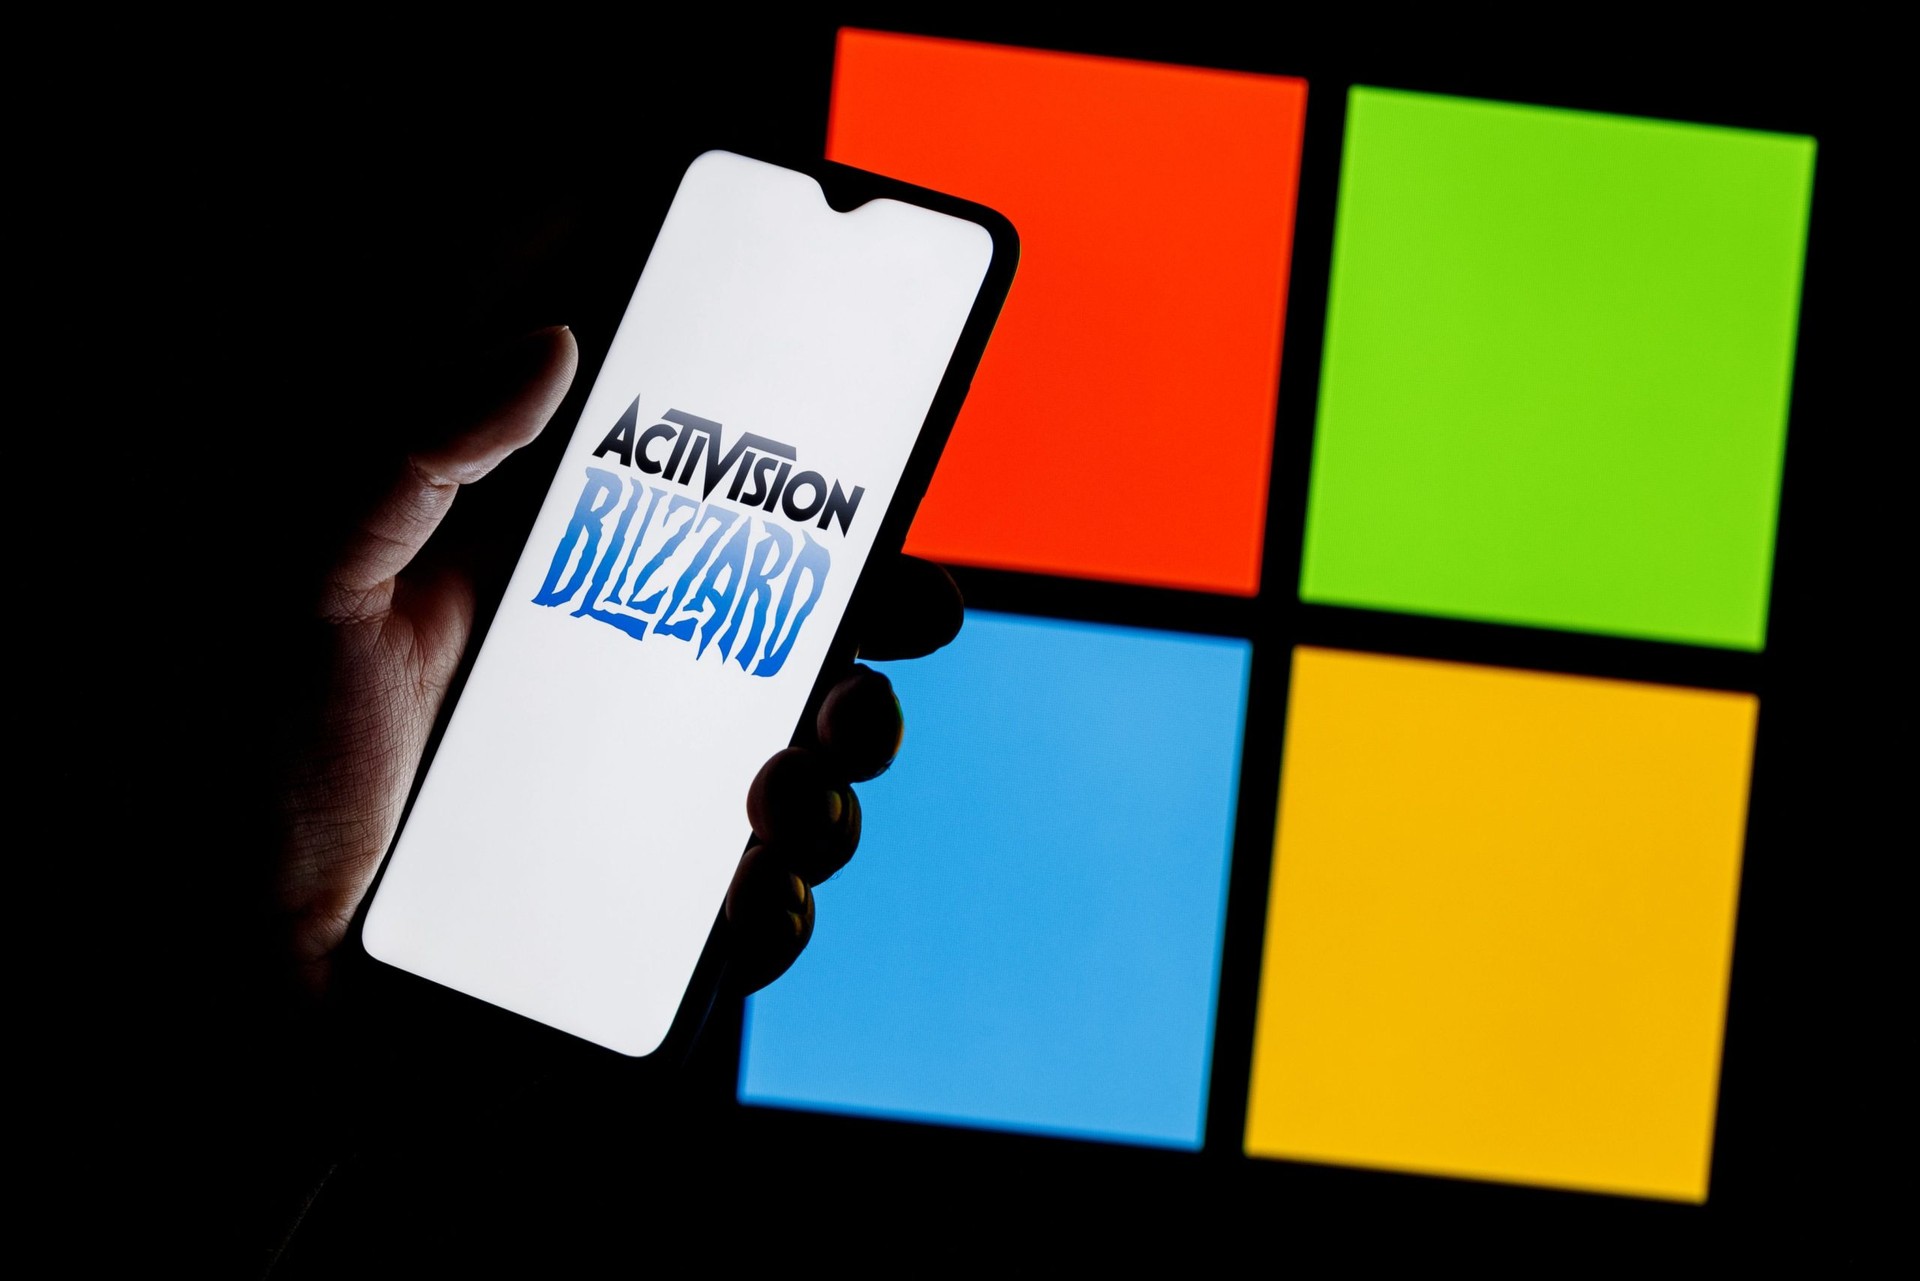 Microsoft Activision, South Africa agrees to a billion dollar acquisition